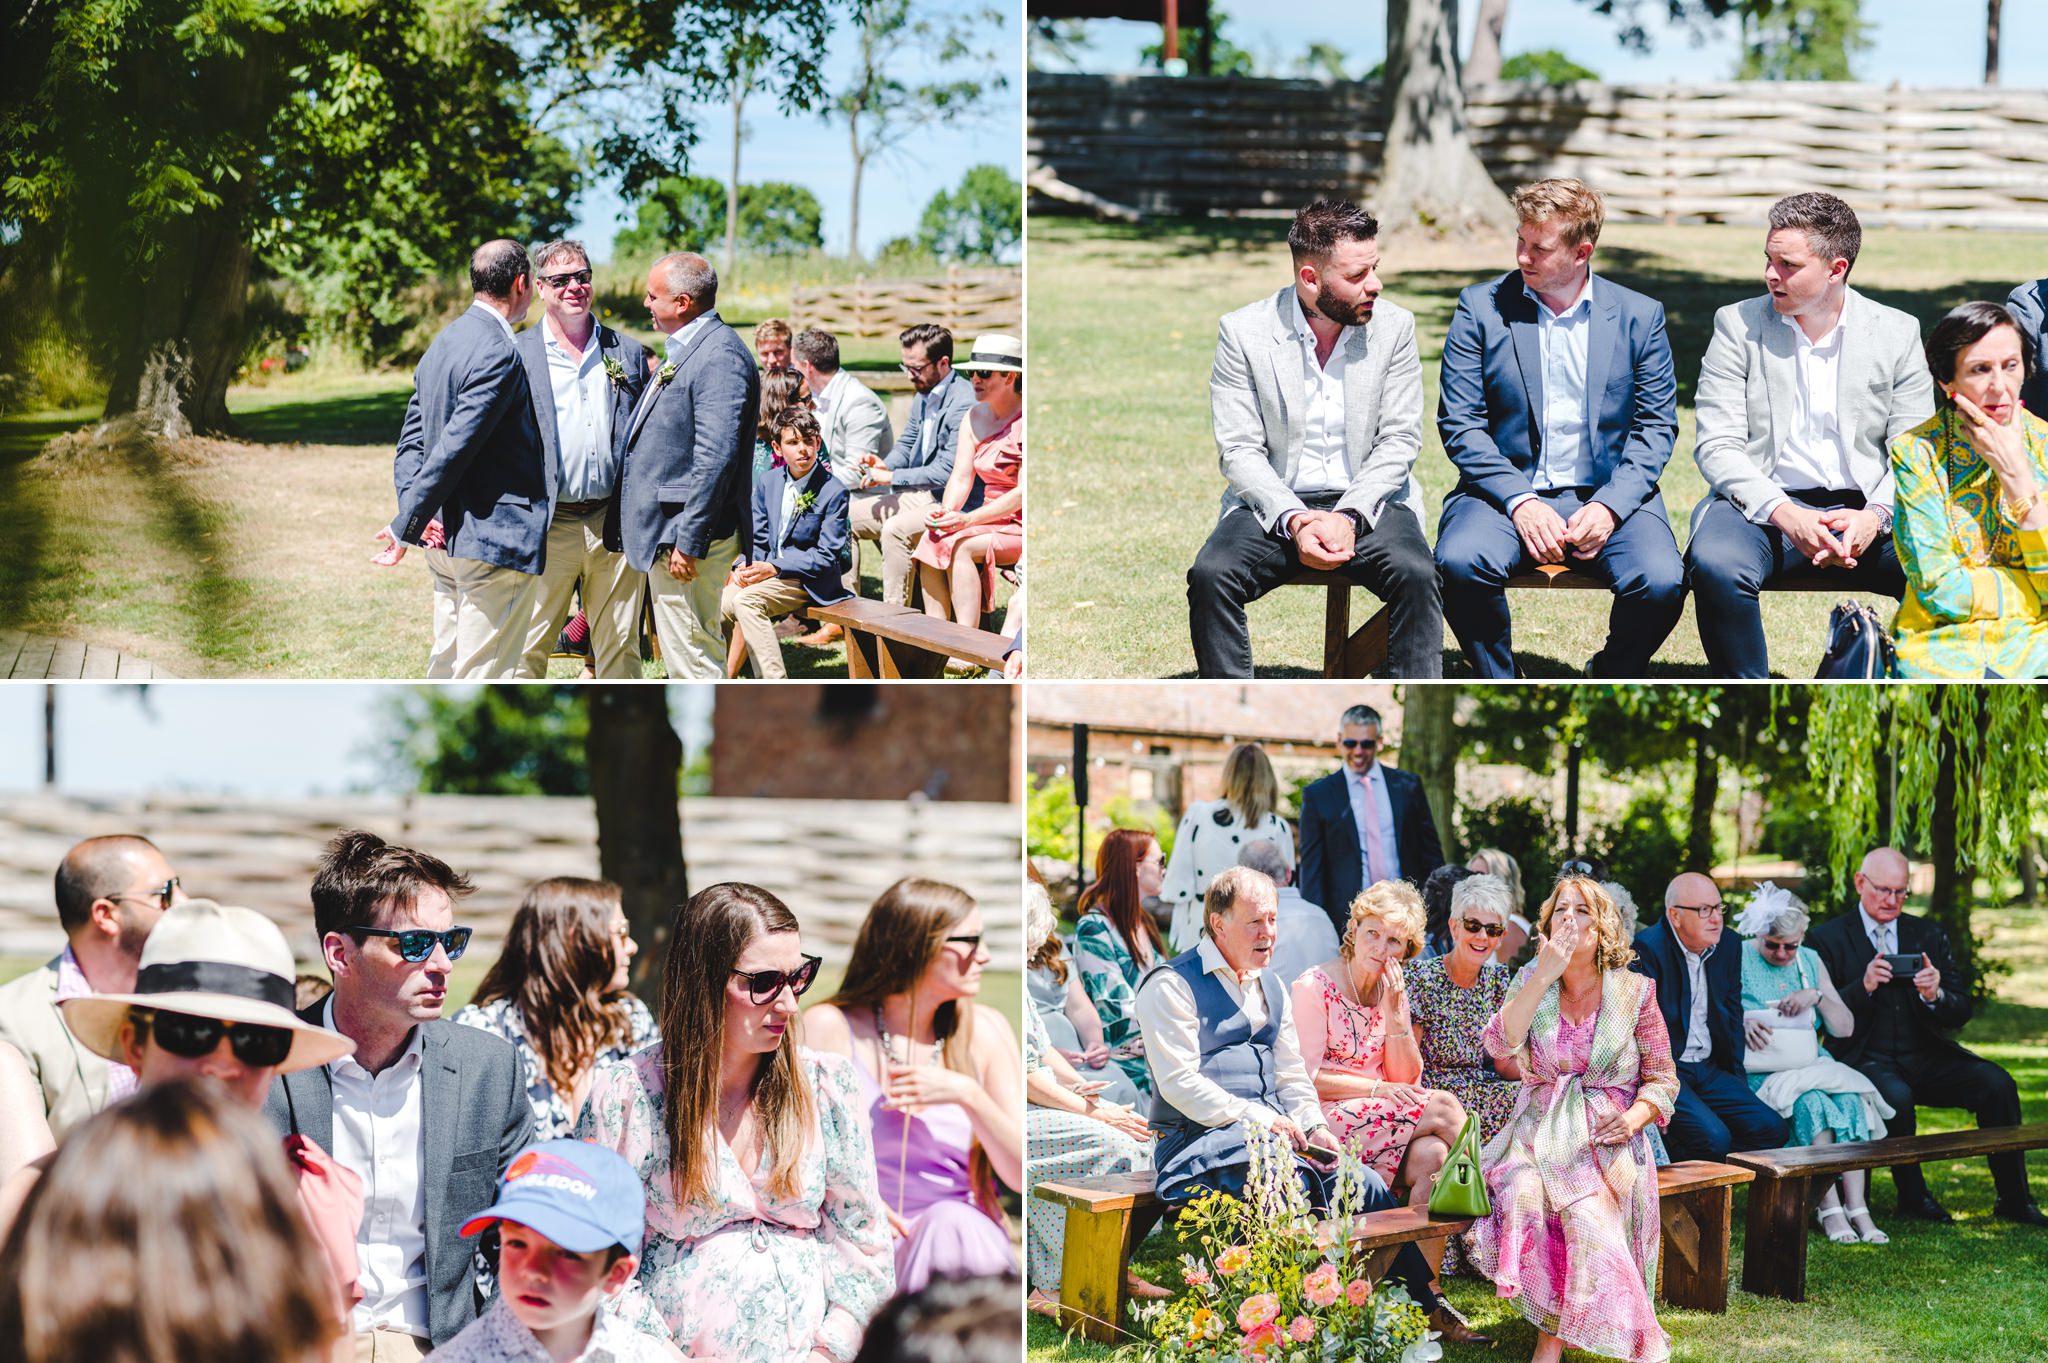 Guests waiting for the outdoor ceremony at Barns and Yard